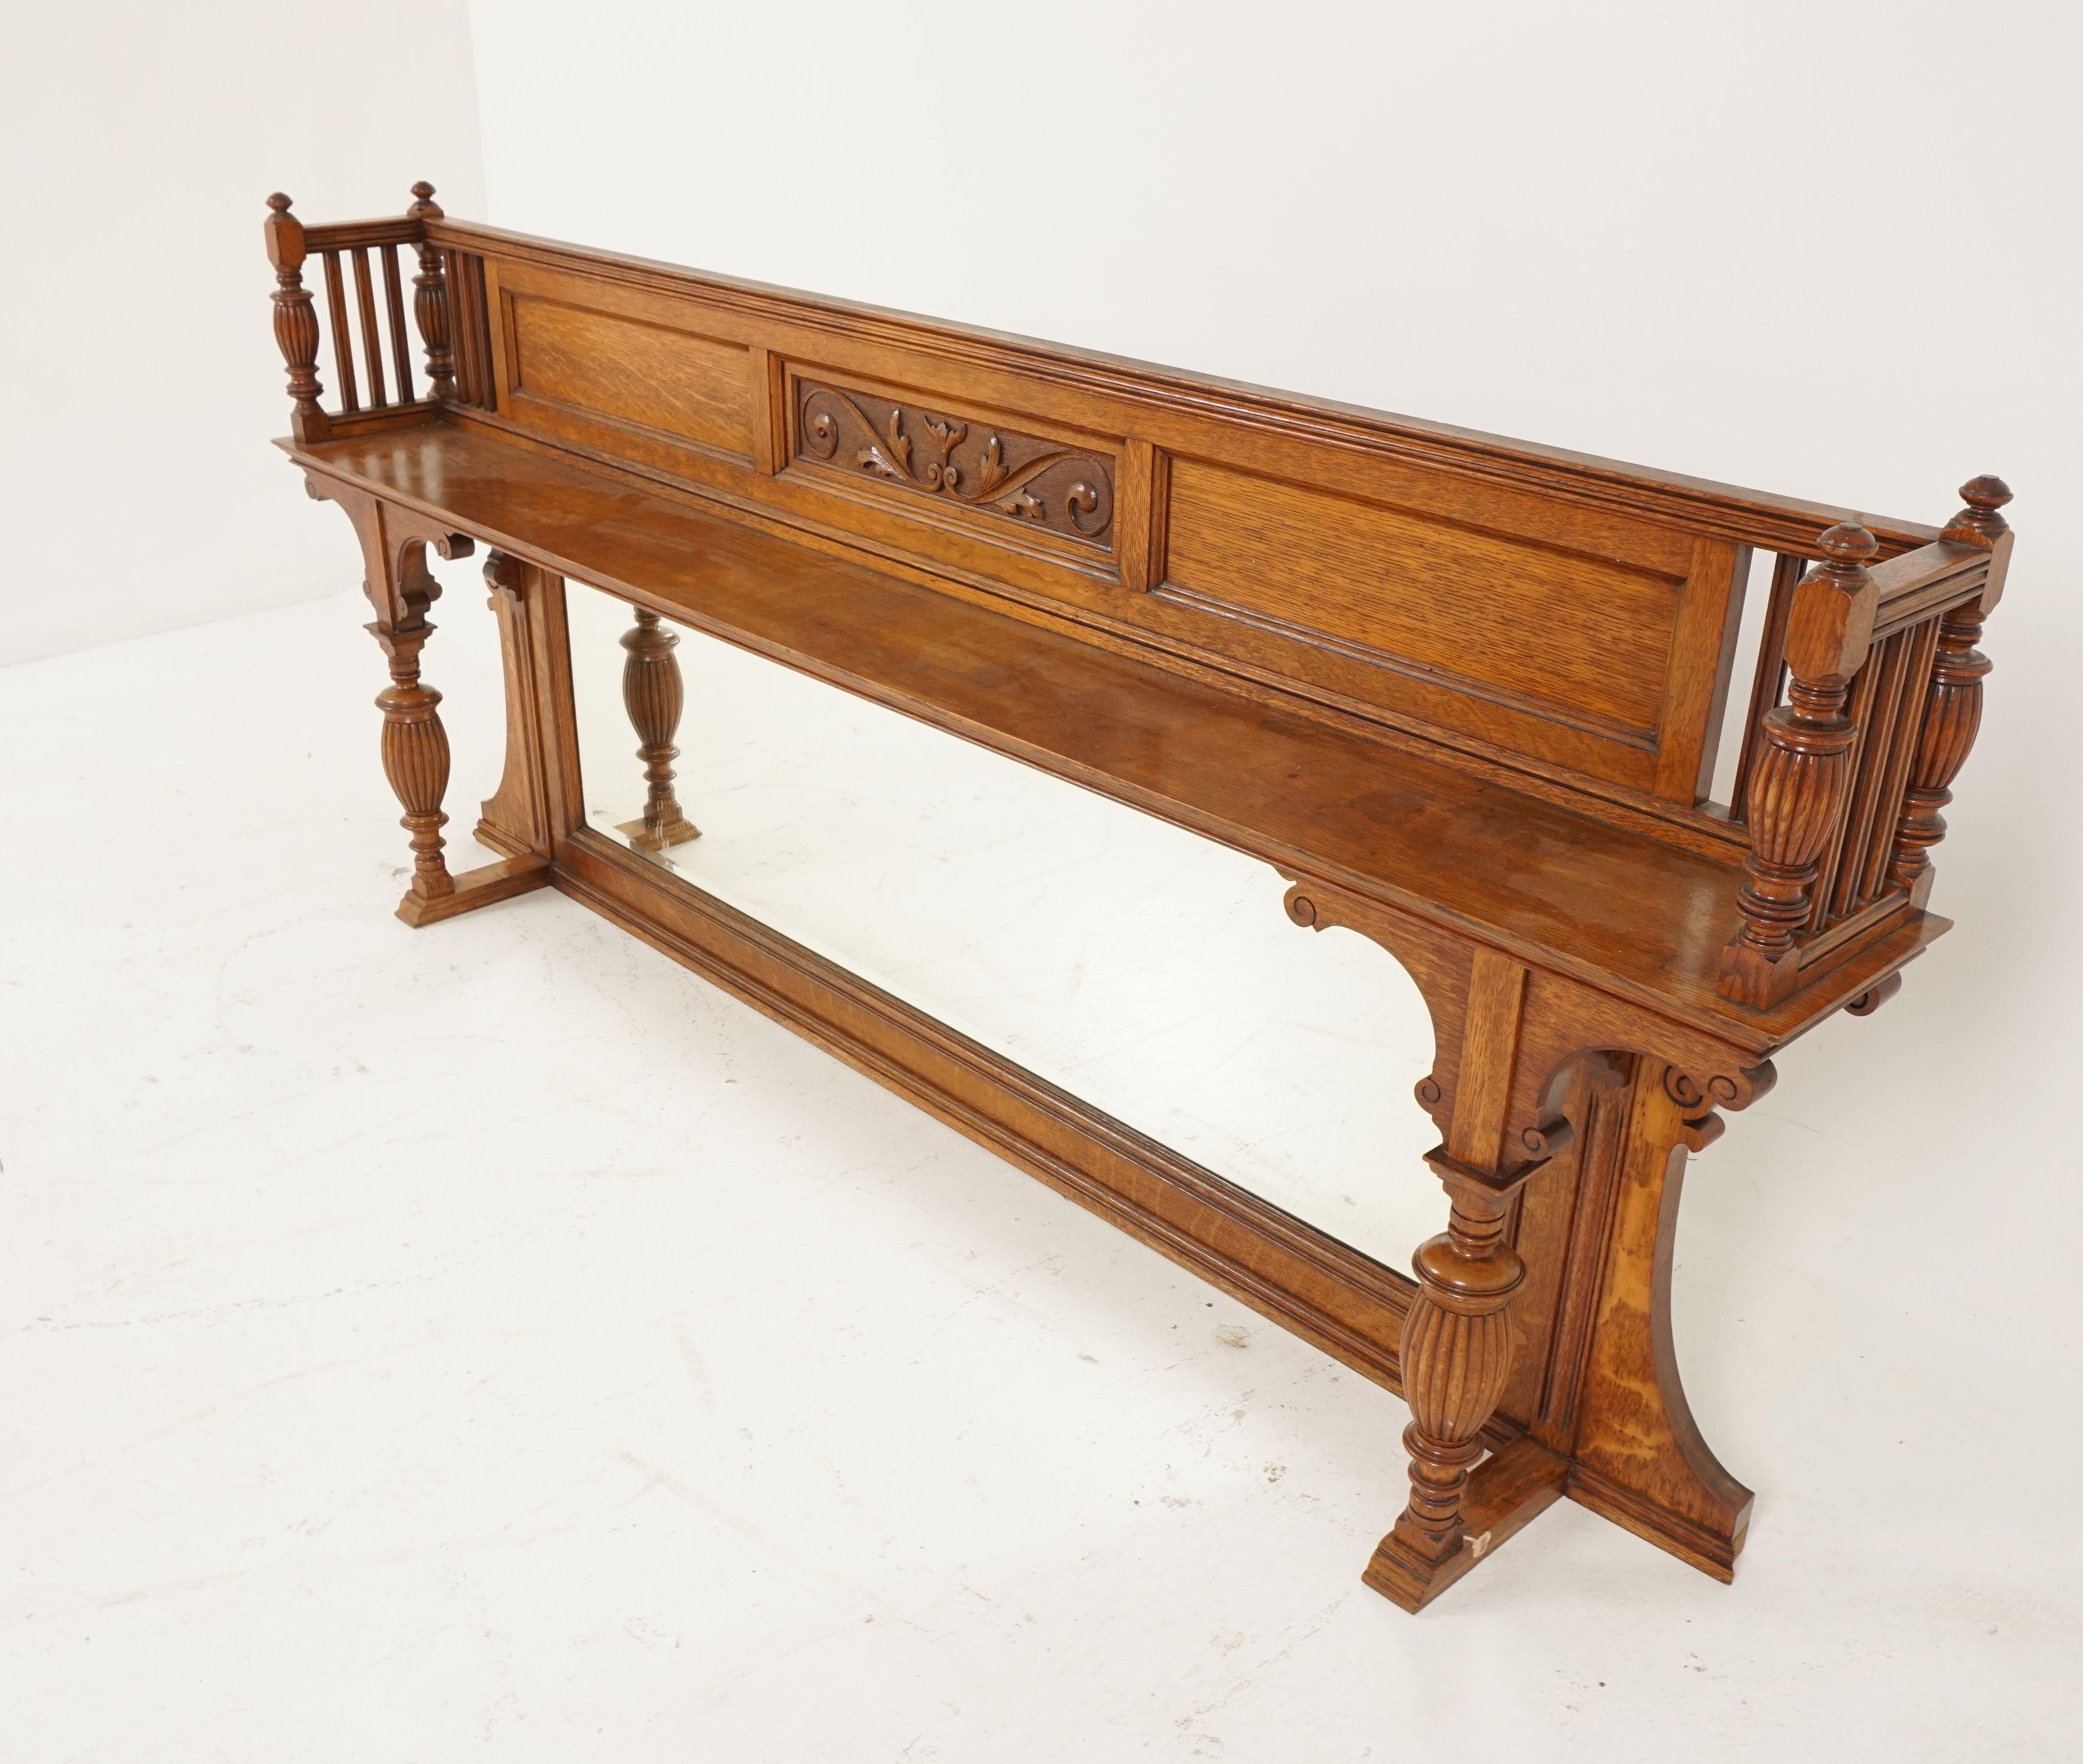 Stunning antique Arts & Crafts oak overmantel, Scotland, 1900, B2156a

Scotland, 1900
Solid oak
Original finish
Tall carved gallery on top with pierced ends
Original beveled mirror
All standing on a pair of carved supports
Wonderful